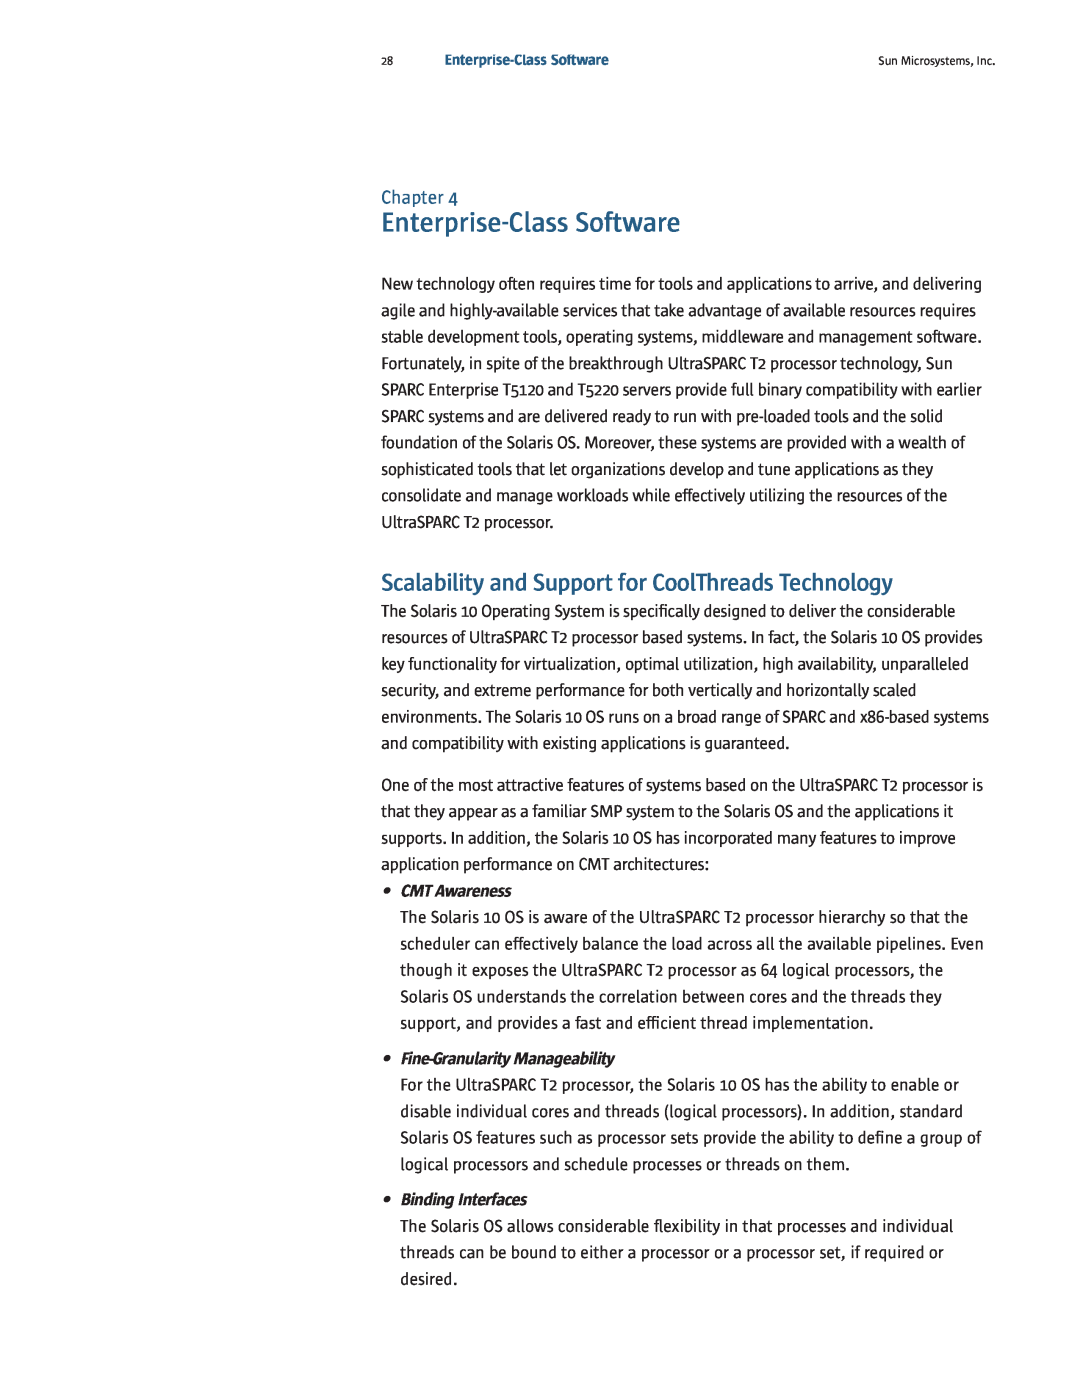 Sun Microsystems T5120, T5220 Enterprise-Class Software, Scalability and Support for CoolThreads Technology, CMT Awareness 